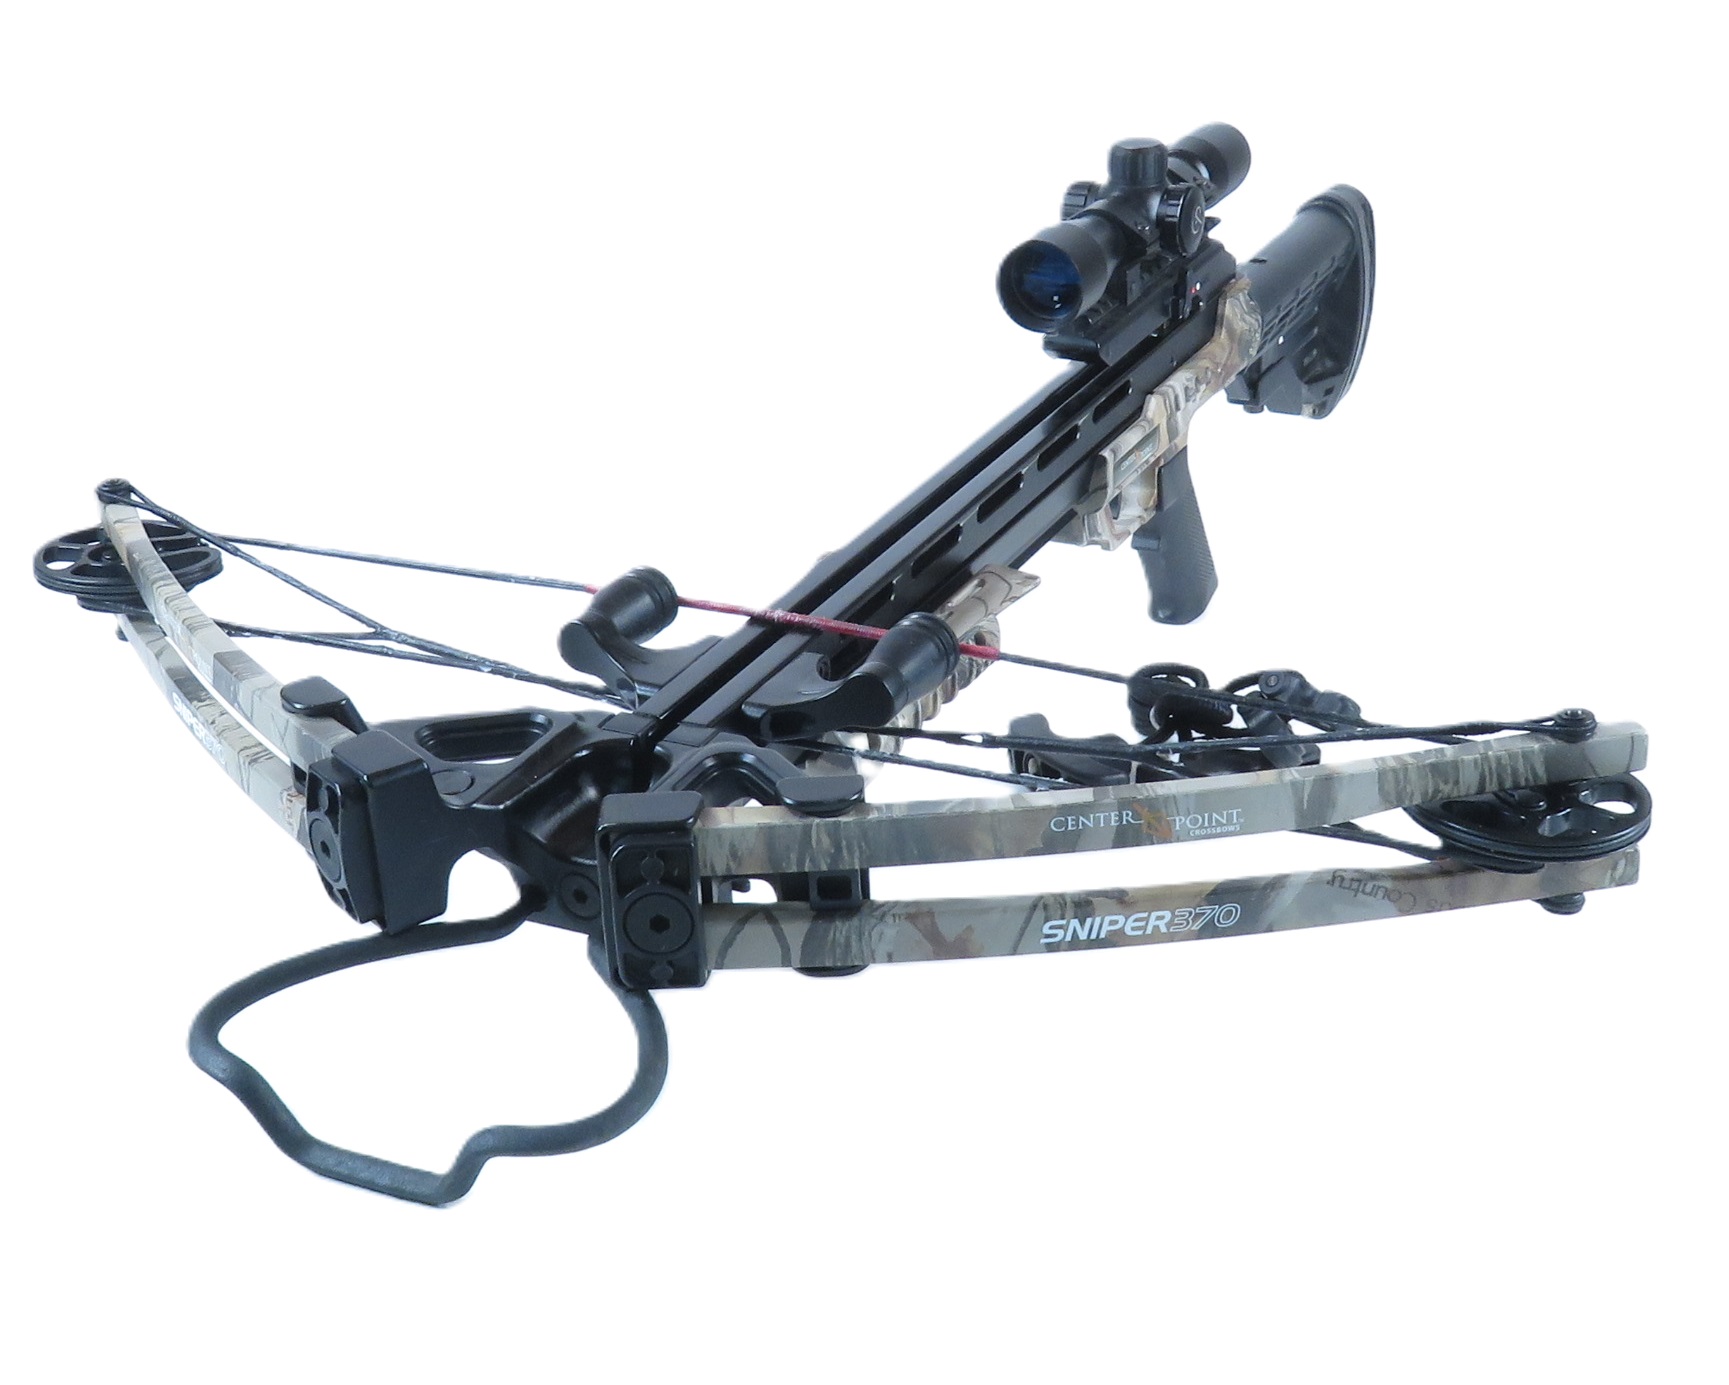 CenterPoint Sniper 370 Camo 370 FPS Hunting Compound Crossbow